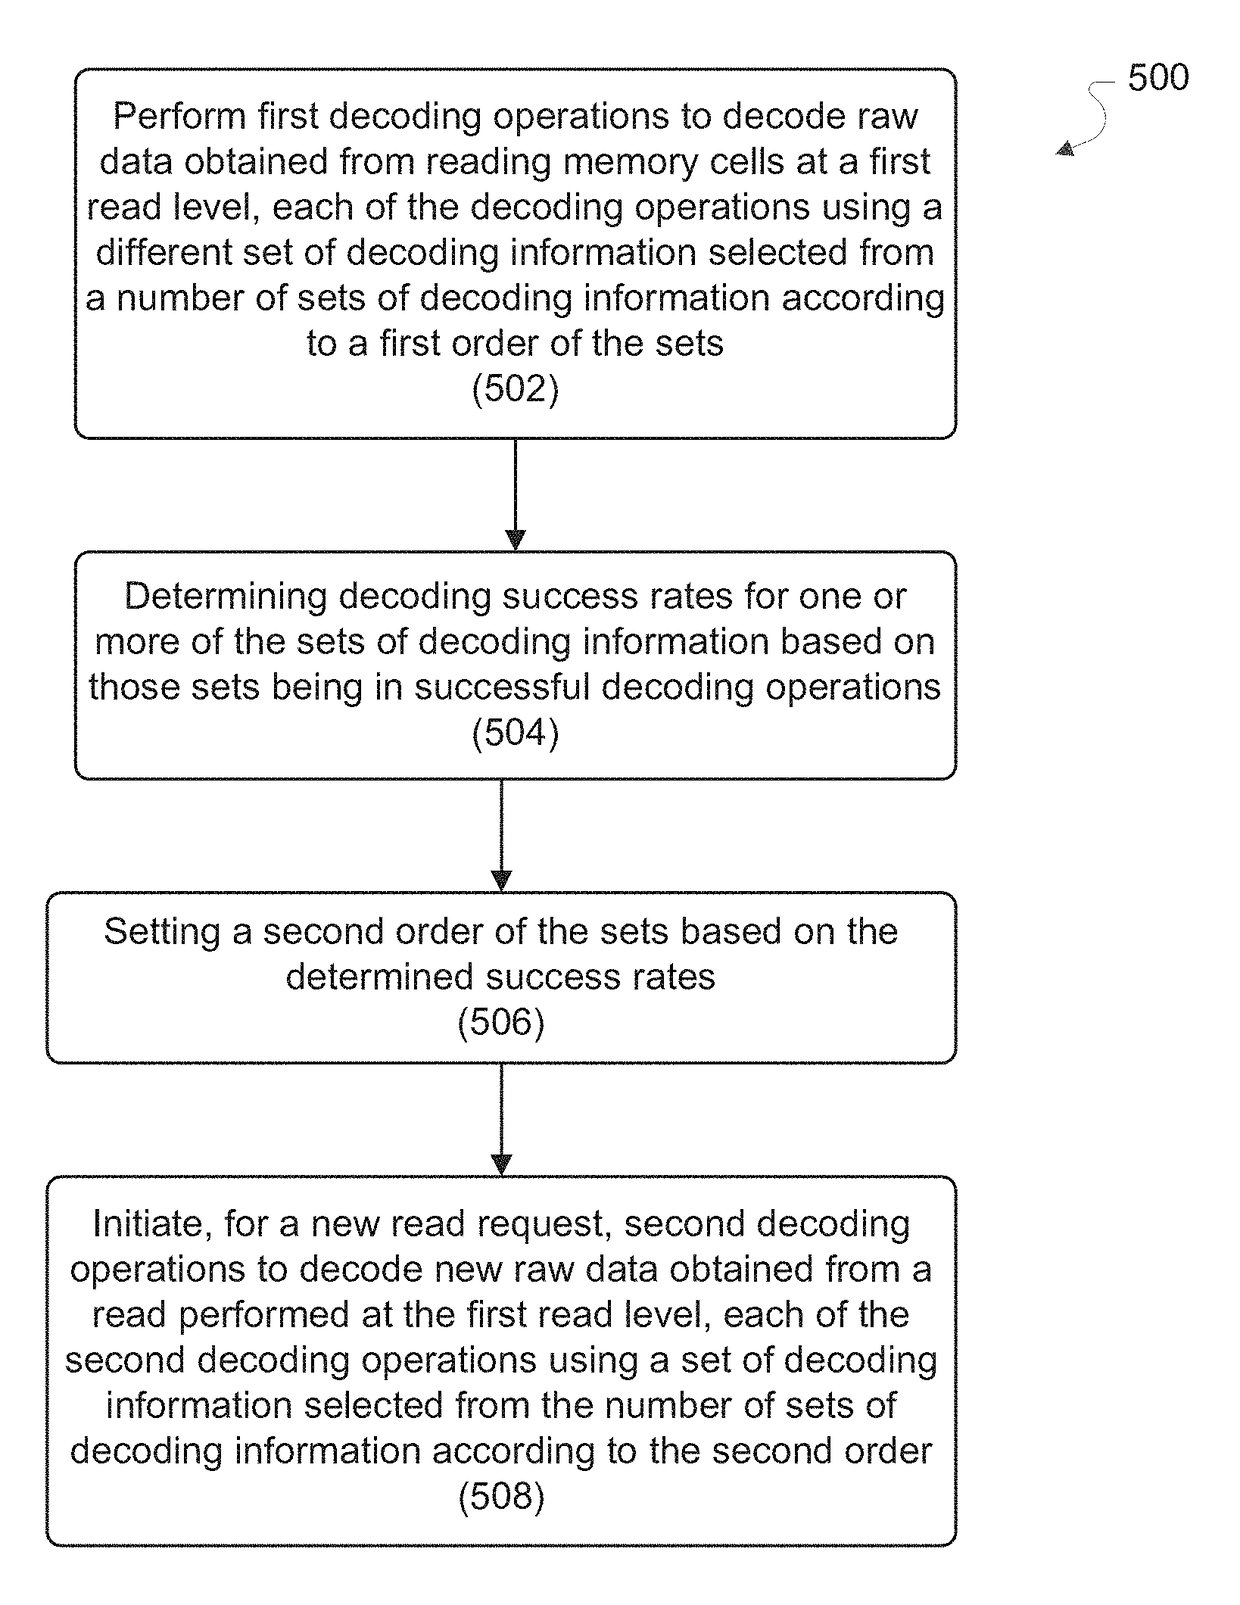 Dynamic selection of soft decoding information